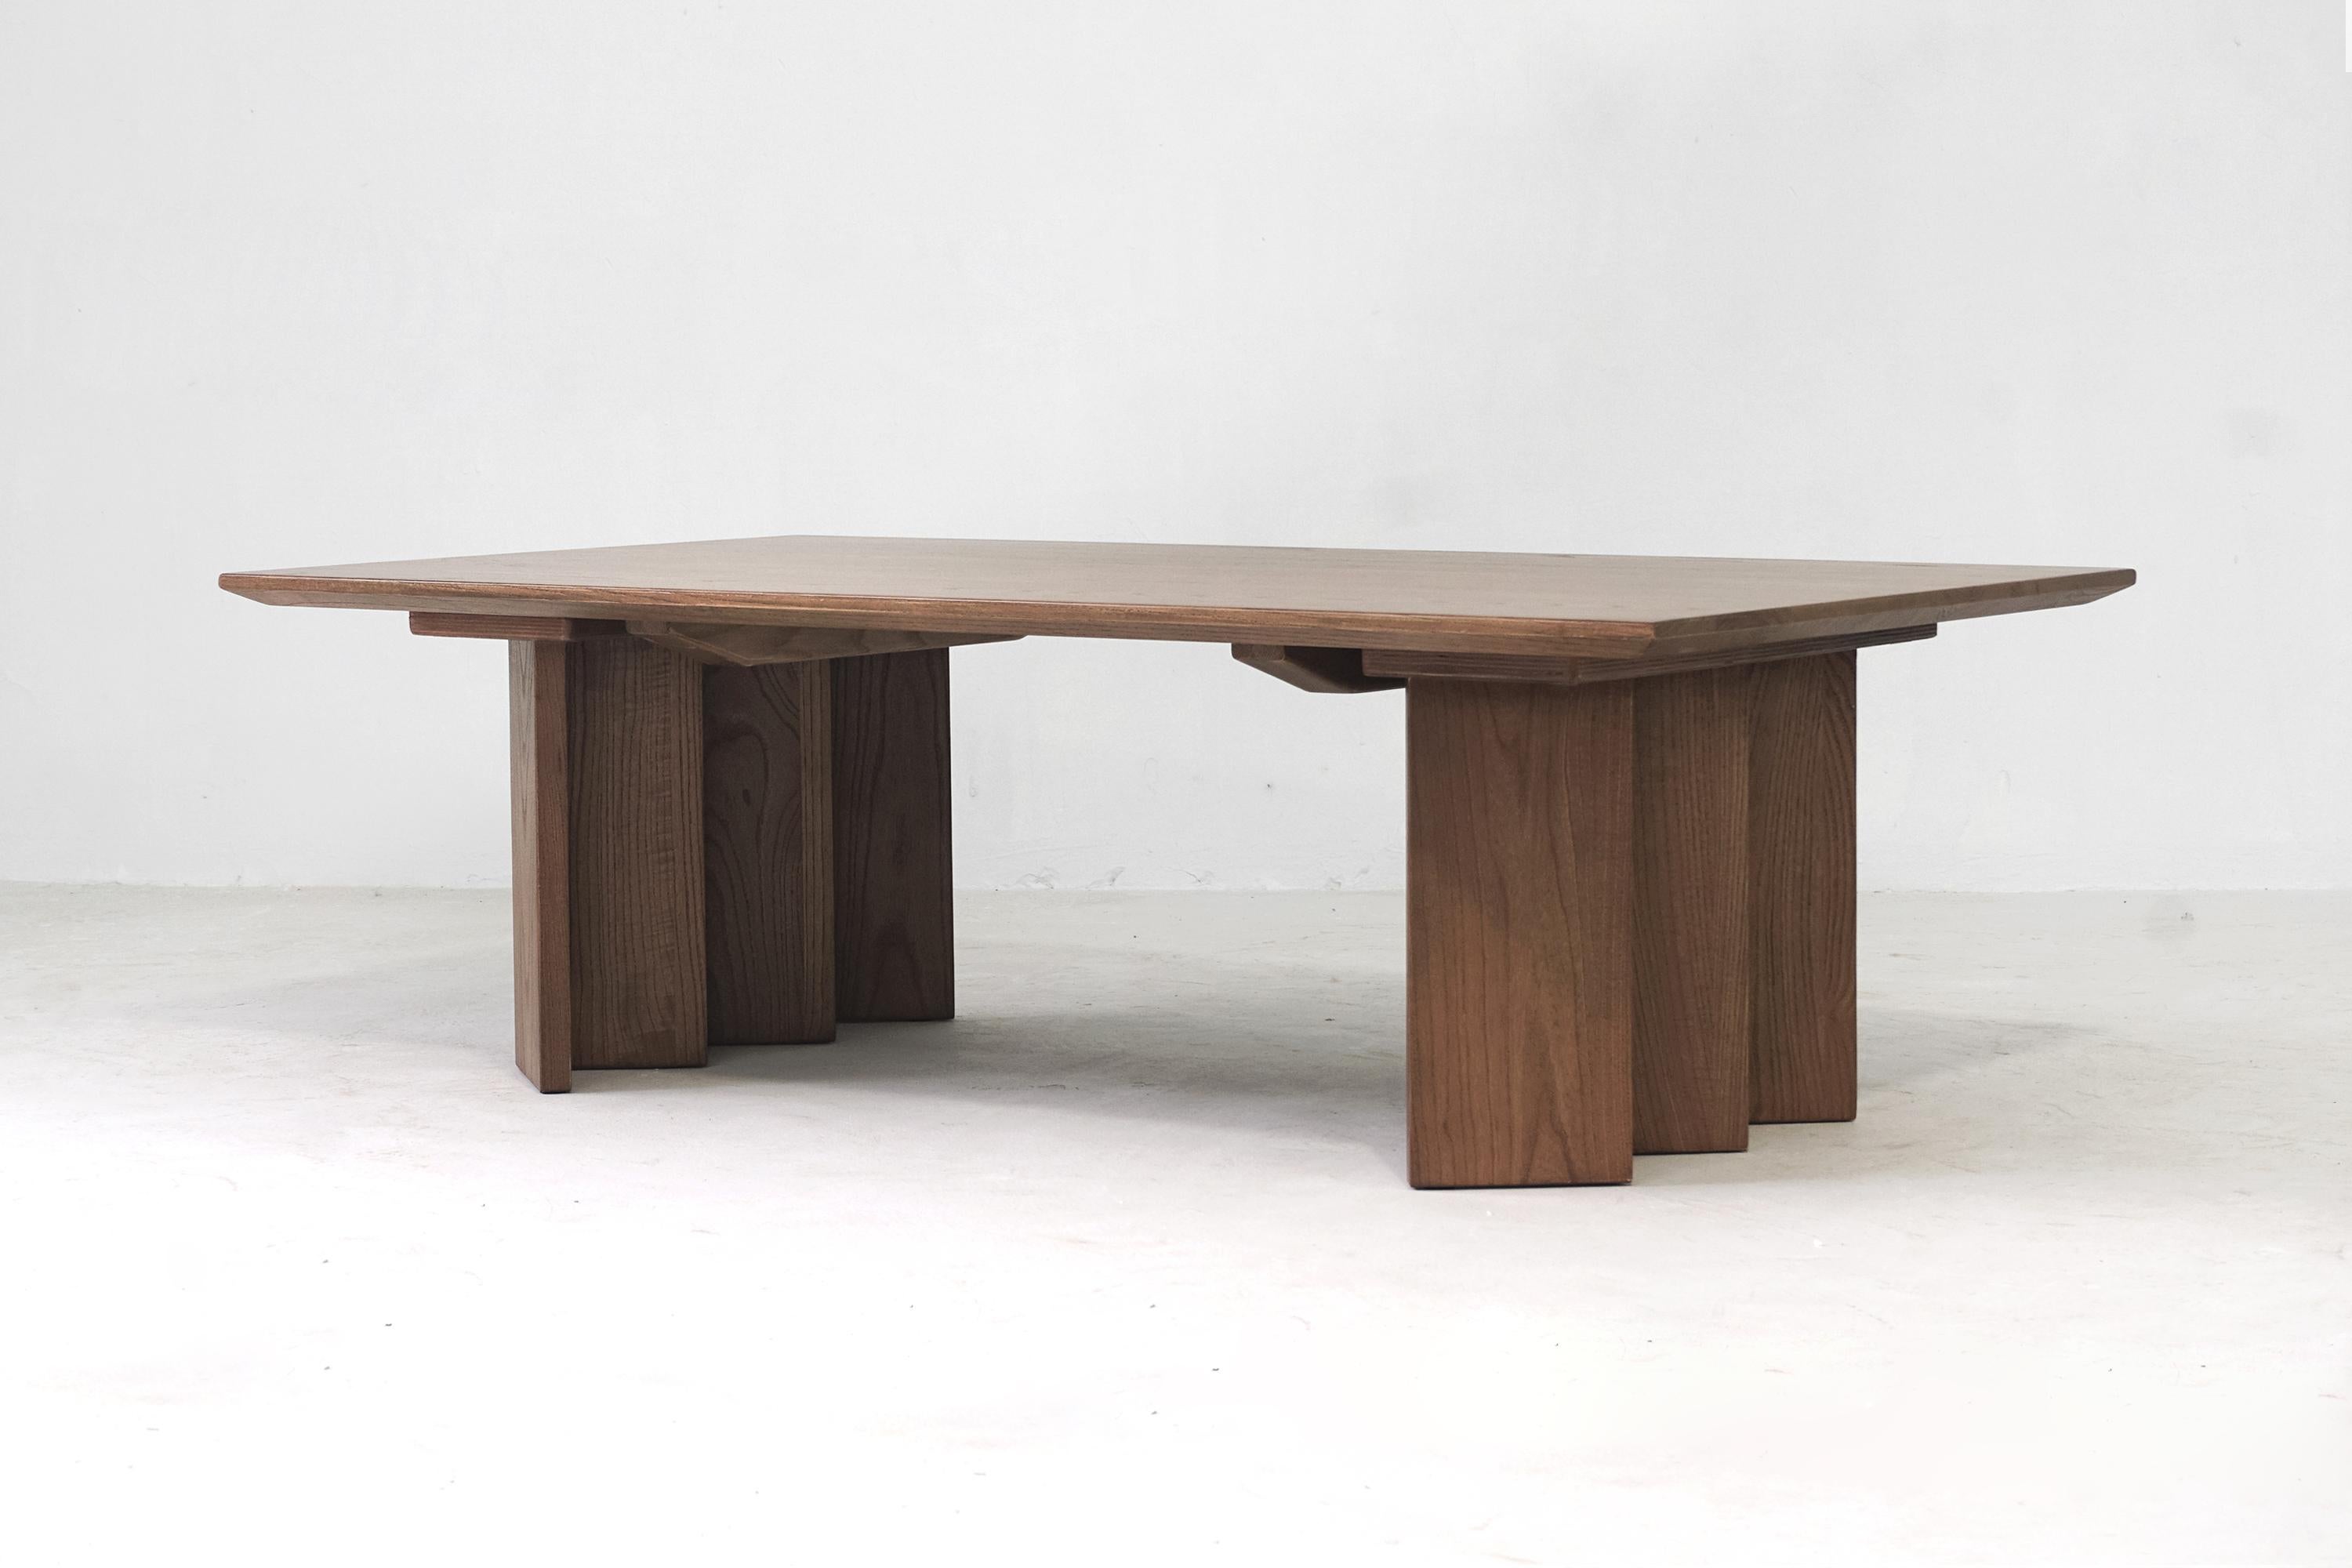 Sun at Six is a contemporary furniture design studio that works with traditional Chinese joinery masters to handcraft our pieces using traditional joinery. 

Great furniture begins with quality materials: raw, sustainably sourced white oak, our